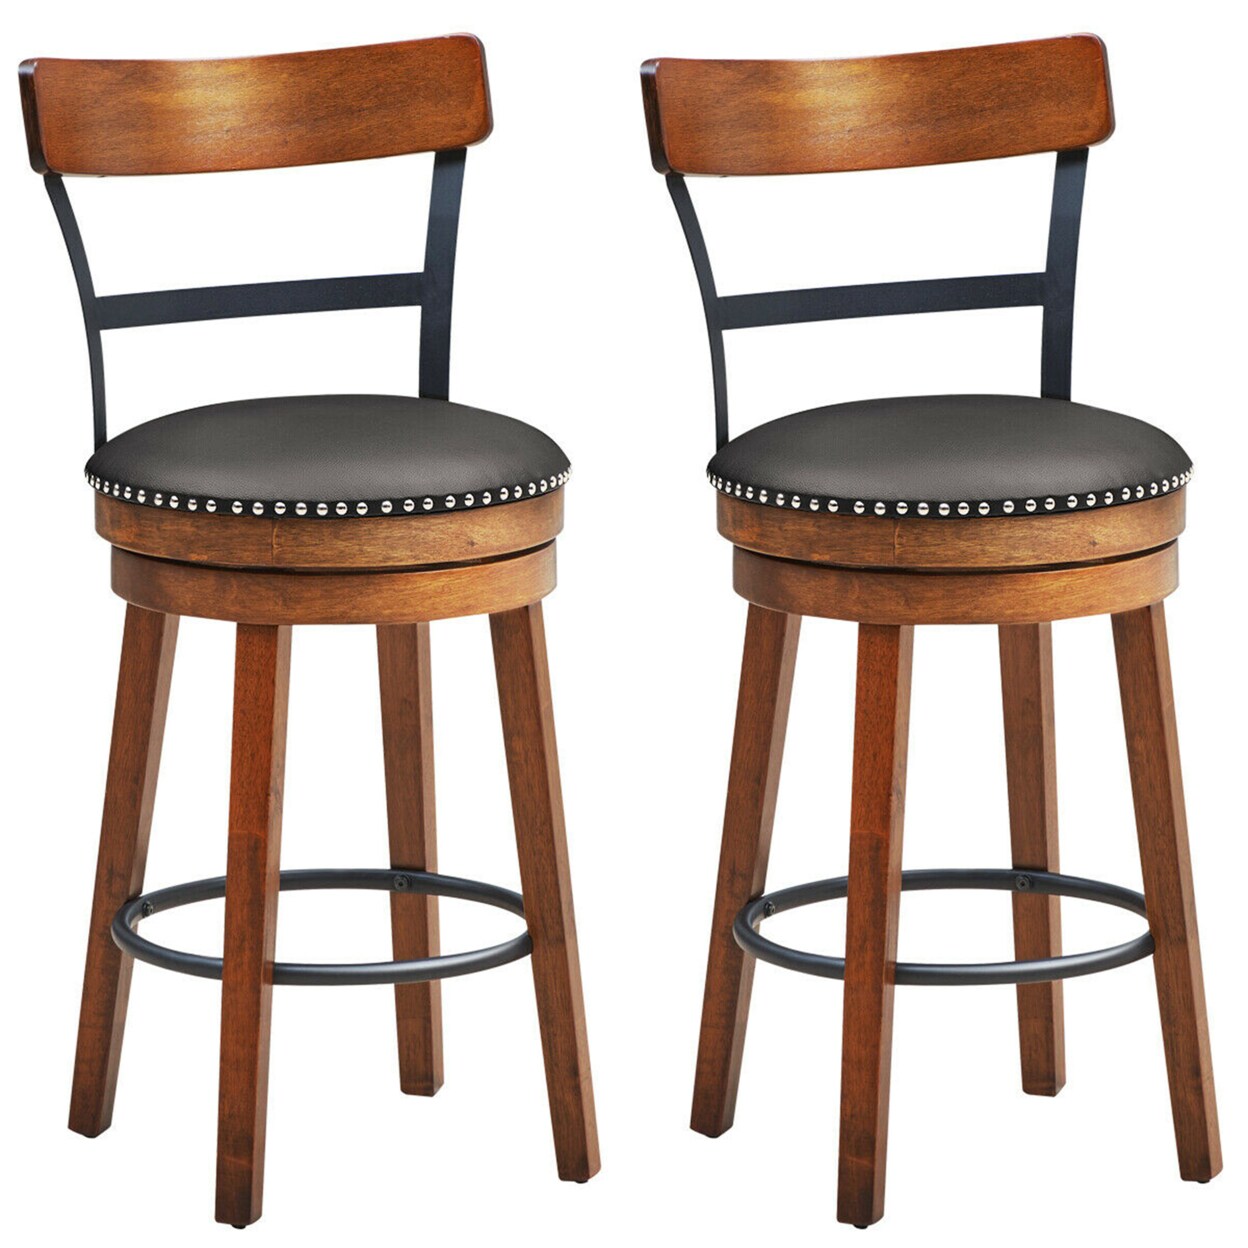 Gymax Set of 2 BarStool 25.5 Swivel Counter Height Dining Chair with Rubber Wood Legs